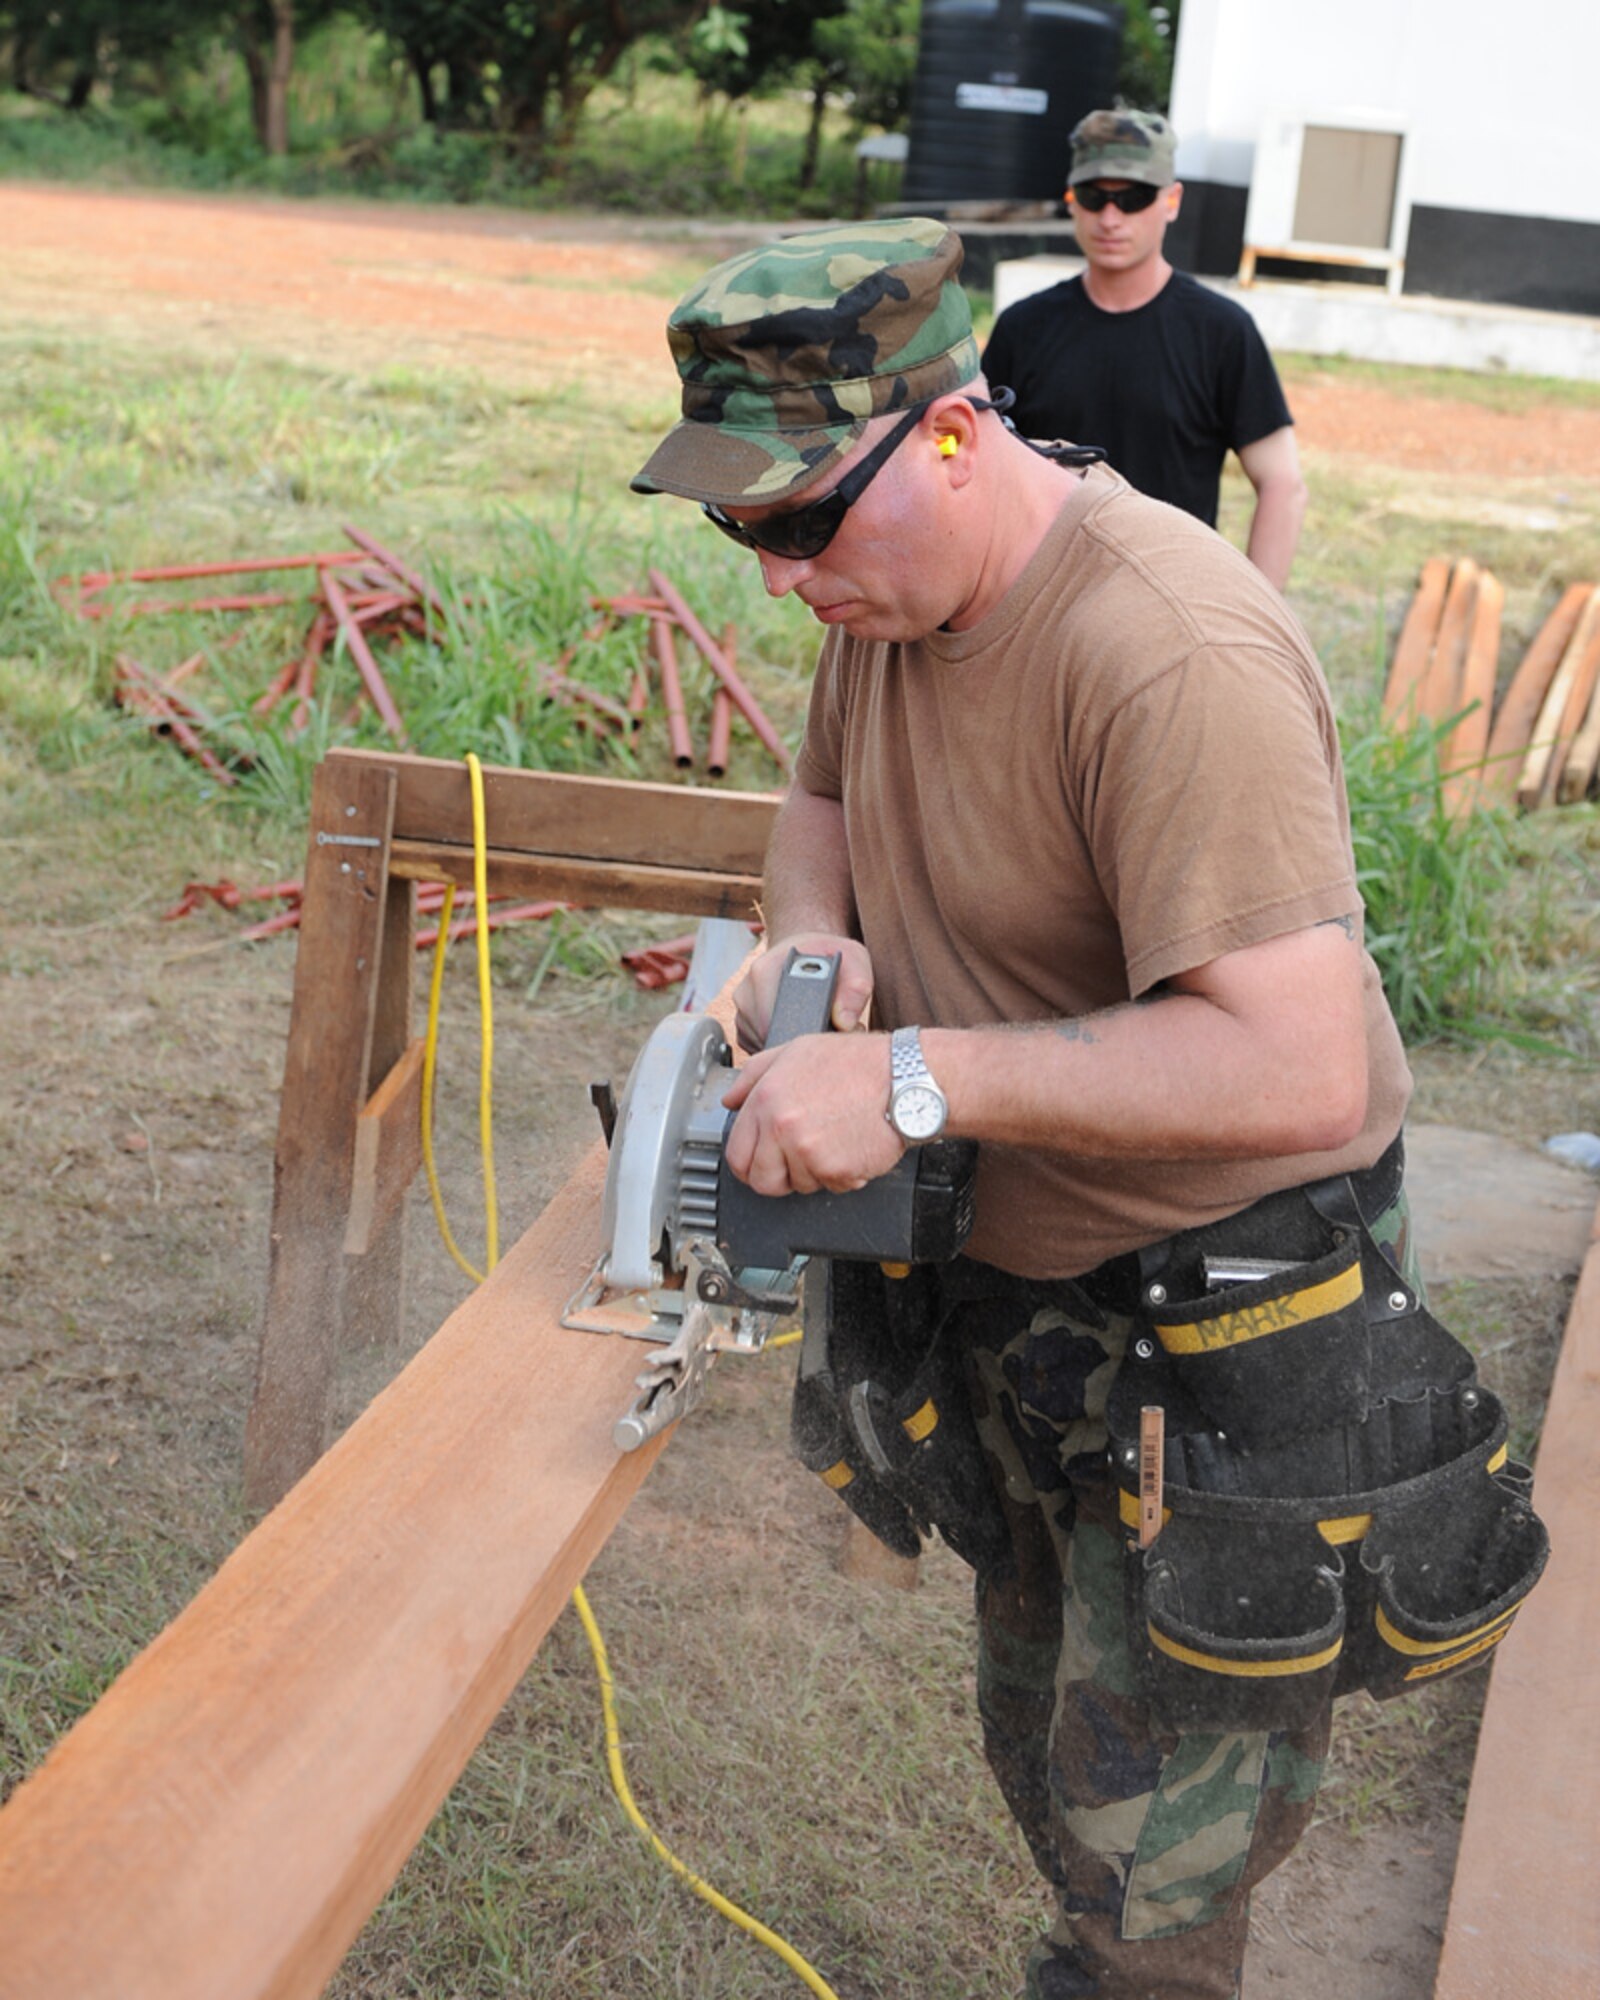 Technical Sgt. Ken Forche uses a saw to cut a piece of lumber as Senior Airman Derek Leppek holds the board steady during a deployment to Accra, Ghana, April 12, 2010. The 127th Civil Engineering Squadron, Michigan Air National Guard, deployed to Ghana for two weeks in April to help perform a major renovation on this training building used by the air force of Ghana. (U.S. Air Force photo by TSgt. Dan Heaton)